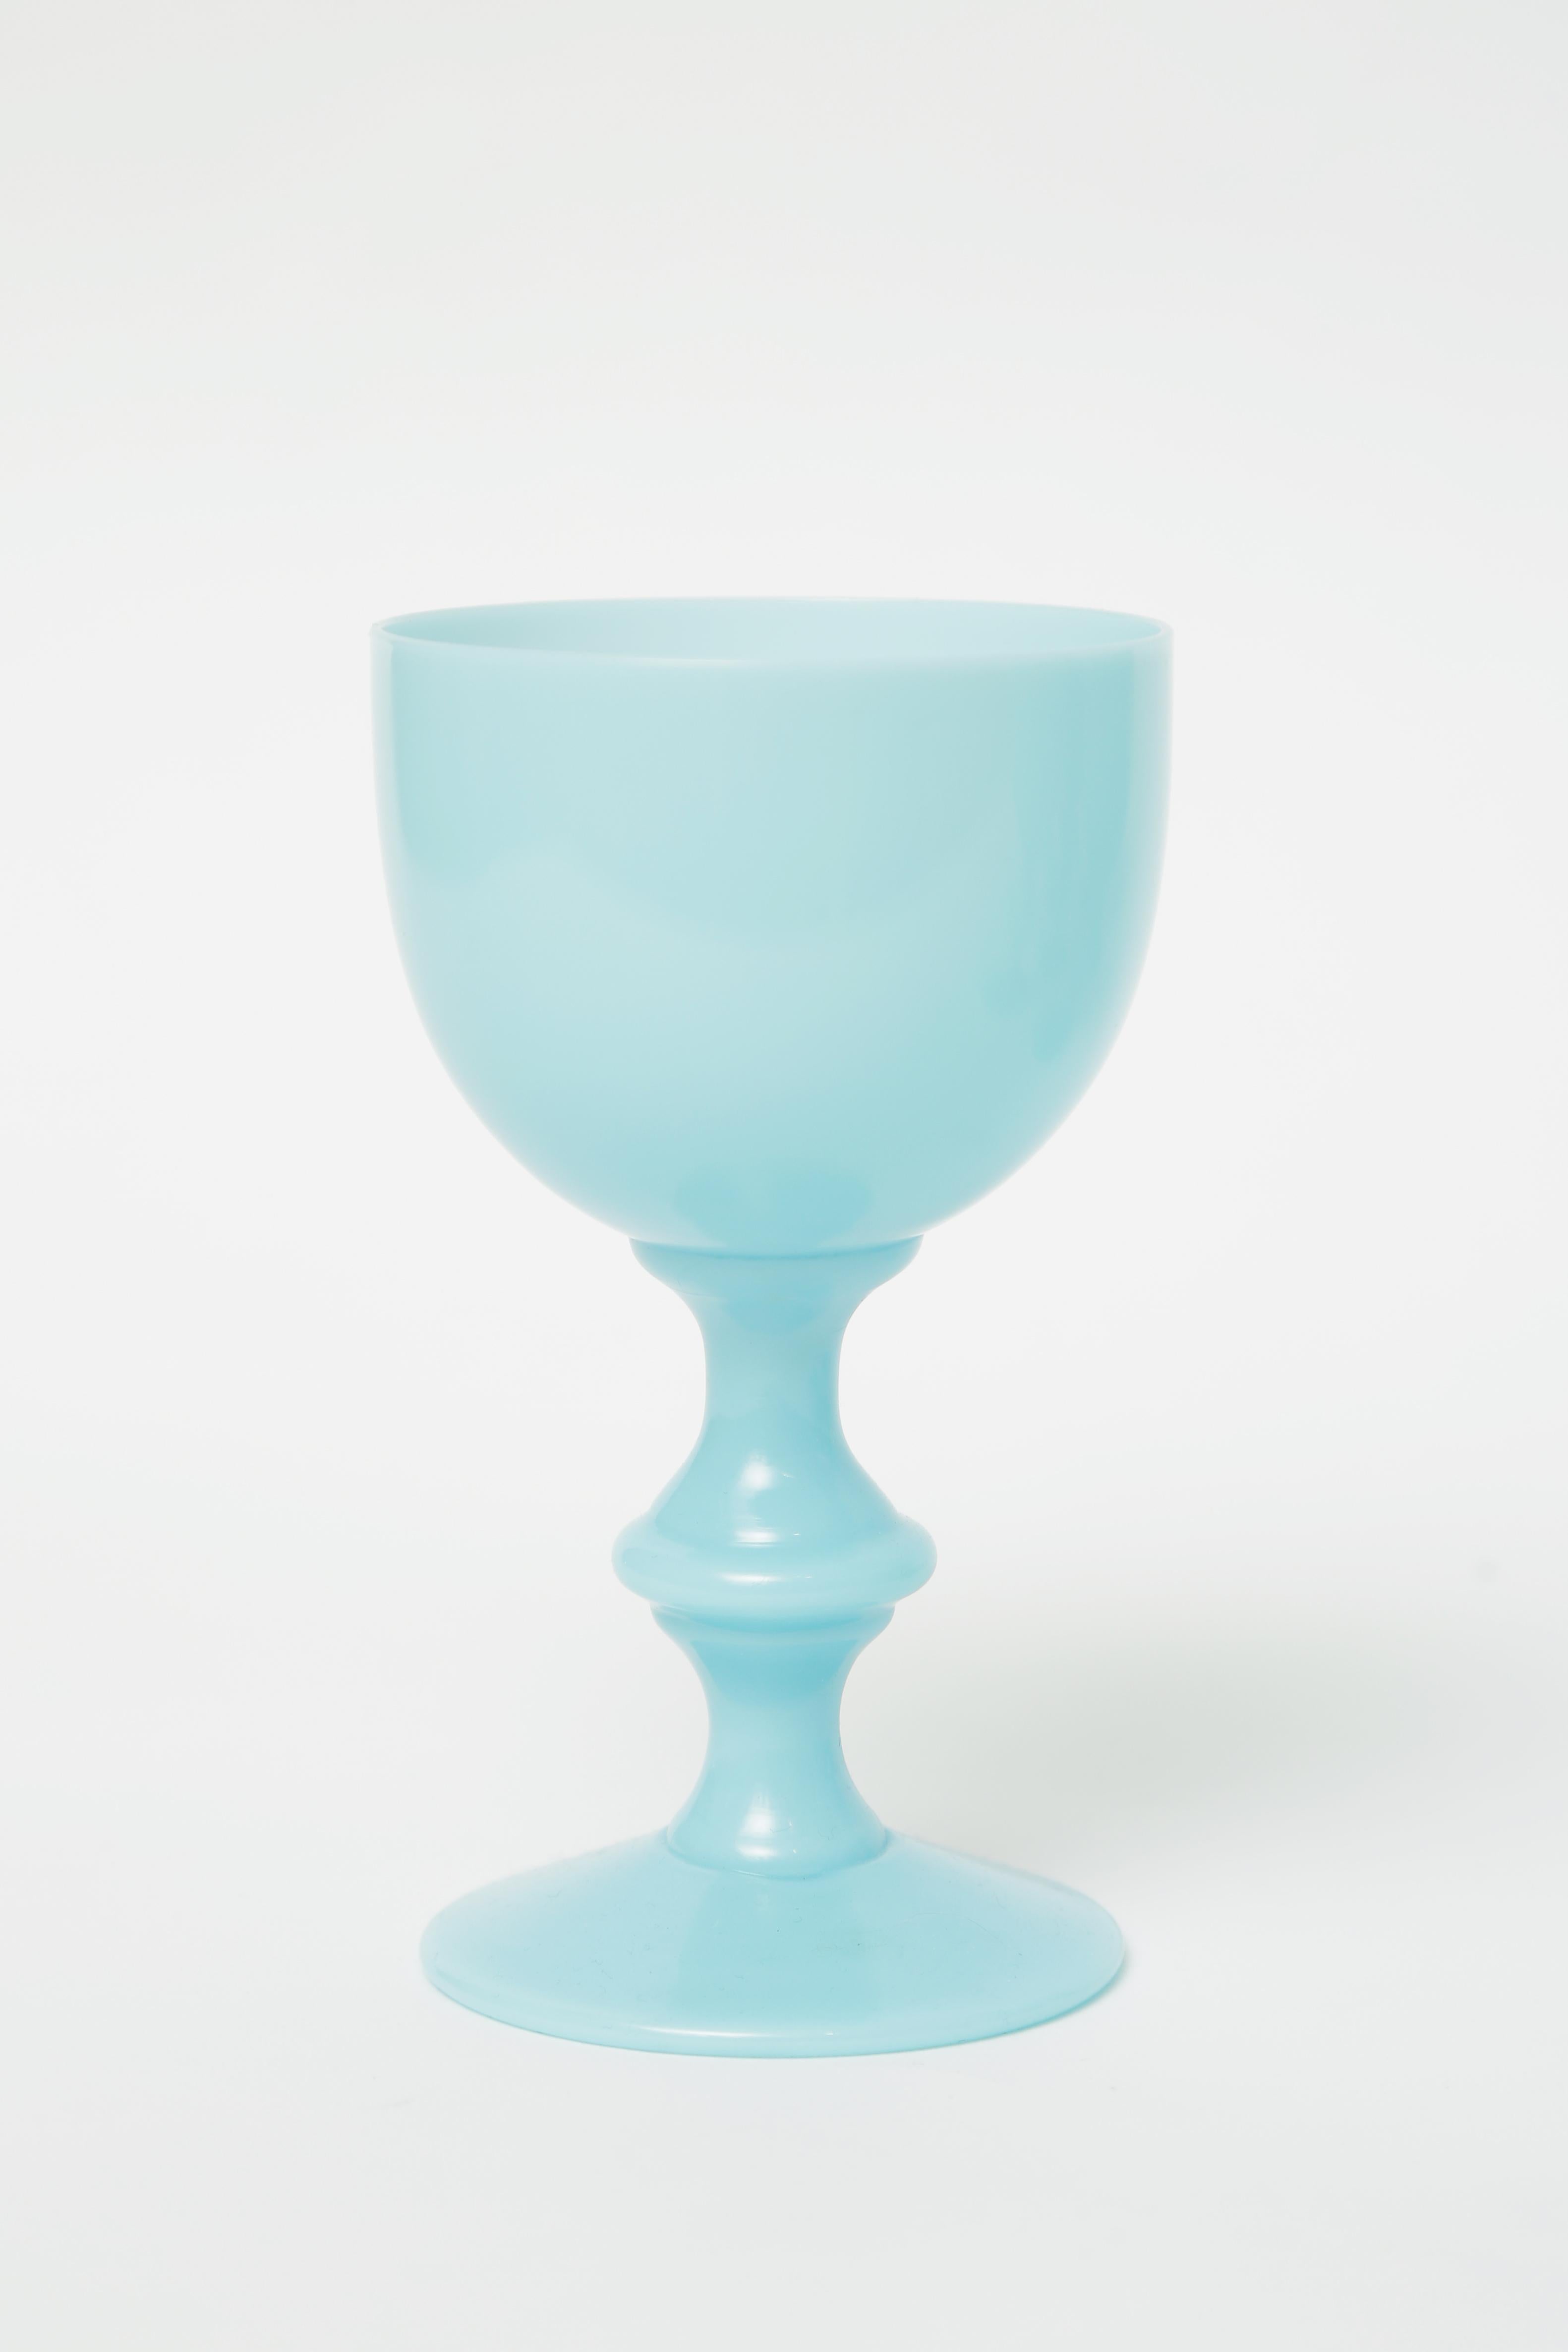 A Classic and colorful set of opaline wine glasses that have a Mid-Century Modern look. Smooth turquoise glass with a soft knob stem. Perfect for specialty cocktails and sure to pop your cabinet or kitchen display with color. In very nice vintage